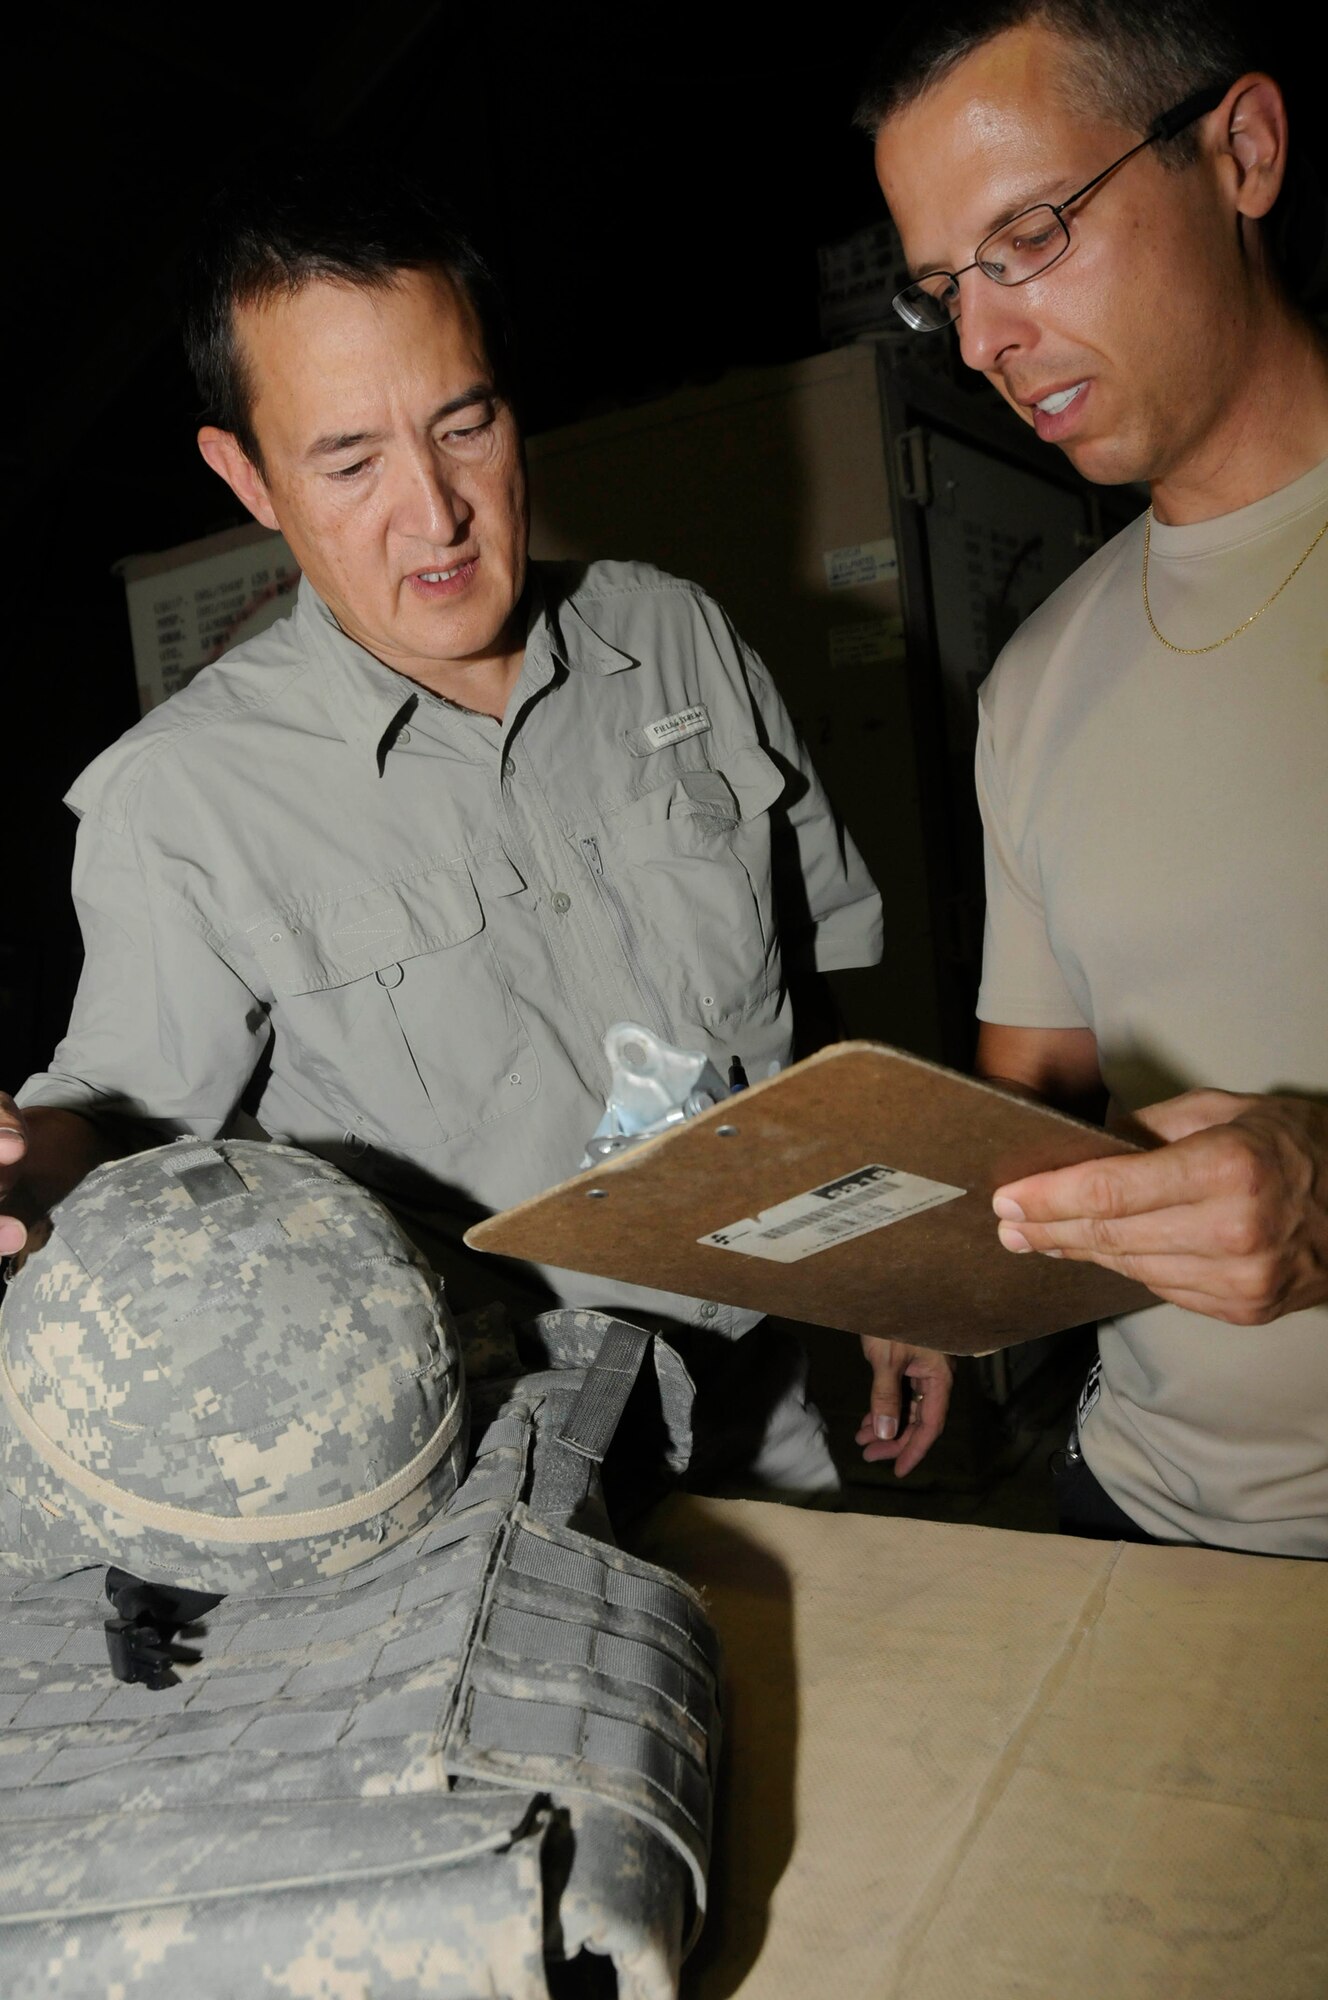 Mr. Ron Lee, logistical representative assigned to the Combined Air and Space Operations Center, conducts an inspection of combat protective gear while Mr. Jim McGreevy, also assigned to the CAOC, writes down any defects and the identifying information on an inventory sheet Sept. 29, 2008, at an undisclosed air base in Southwest Asia.  Mr. Lee, a native of Columbia, Md., is deployed from Fort Meade, Md., and Mr. McGreevy, a native of Fort Meade, Md., is deployed from Fort Meade, Md.  Both are deployed supporting Operations Iraqi and Enduring Freedom and Joint Task Force-Horn of Africa. (U.S. Air Force photo by Staff Sgt. Darnell T. Cannady)